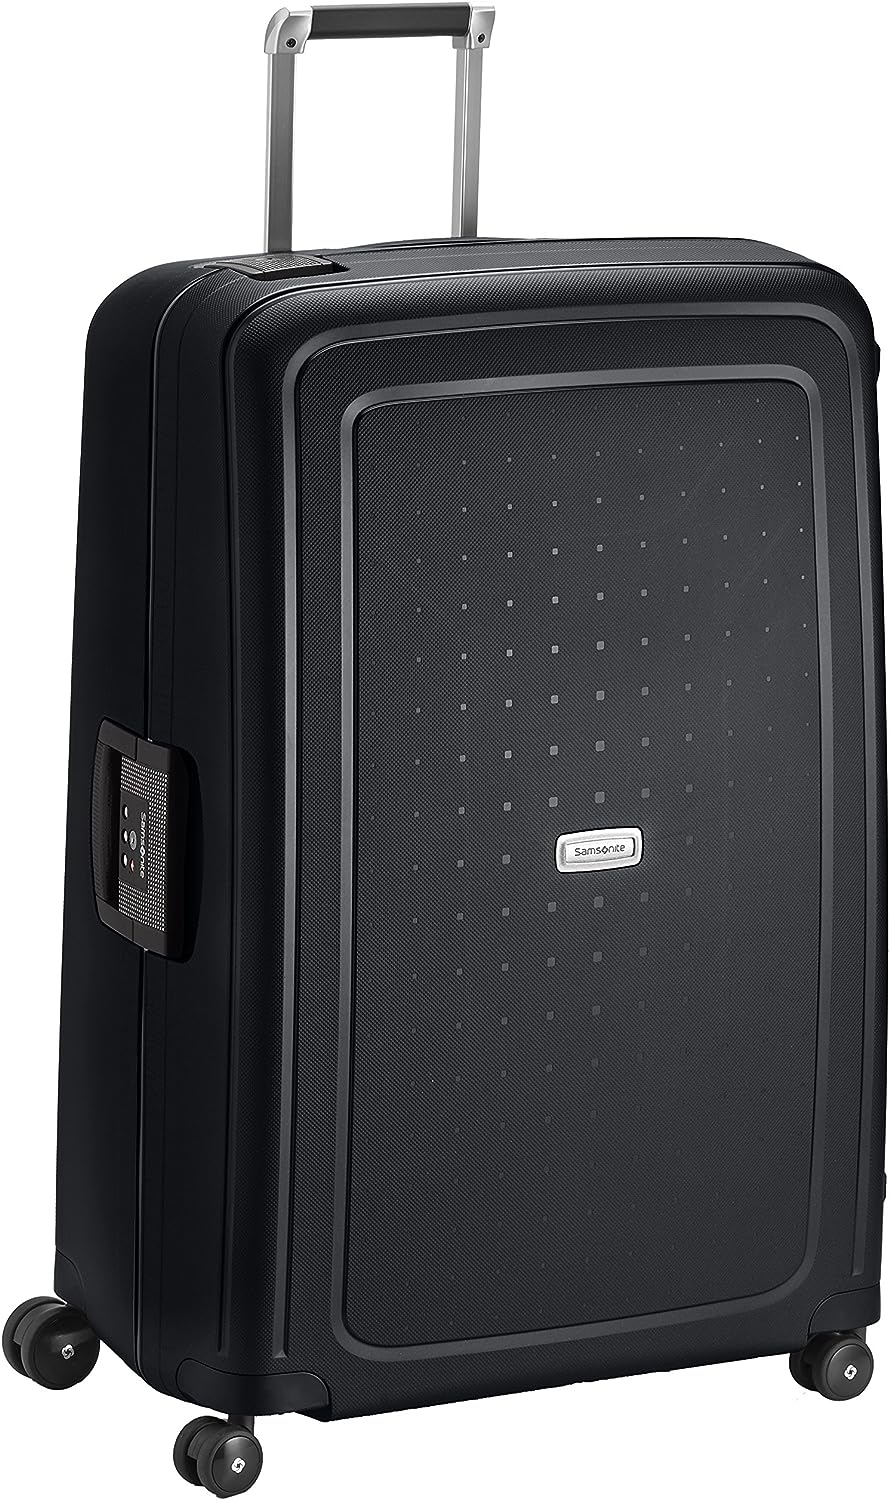 1. The Best Comfy Luggage for Seniors: Samsonite S’Cure Spinner